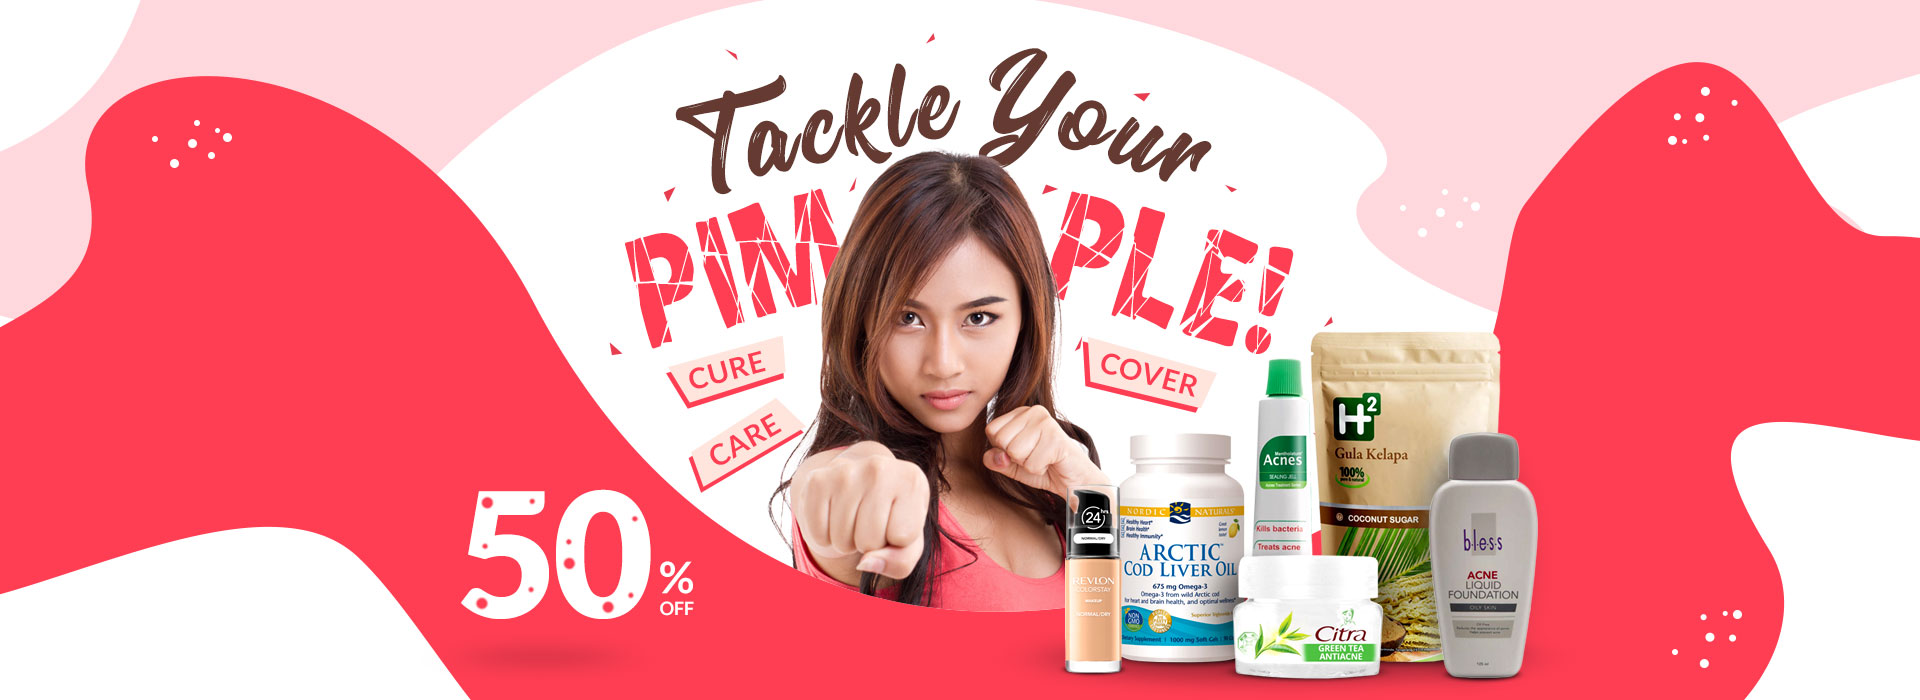 Tackle Your Pimple